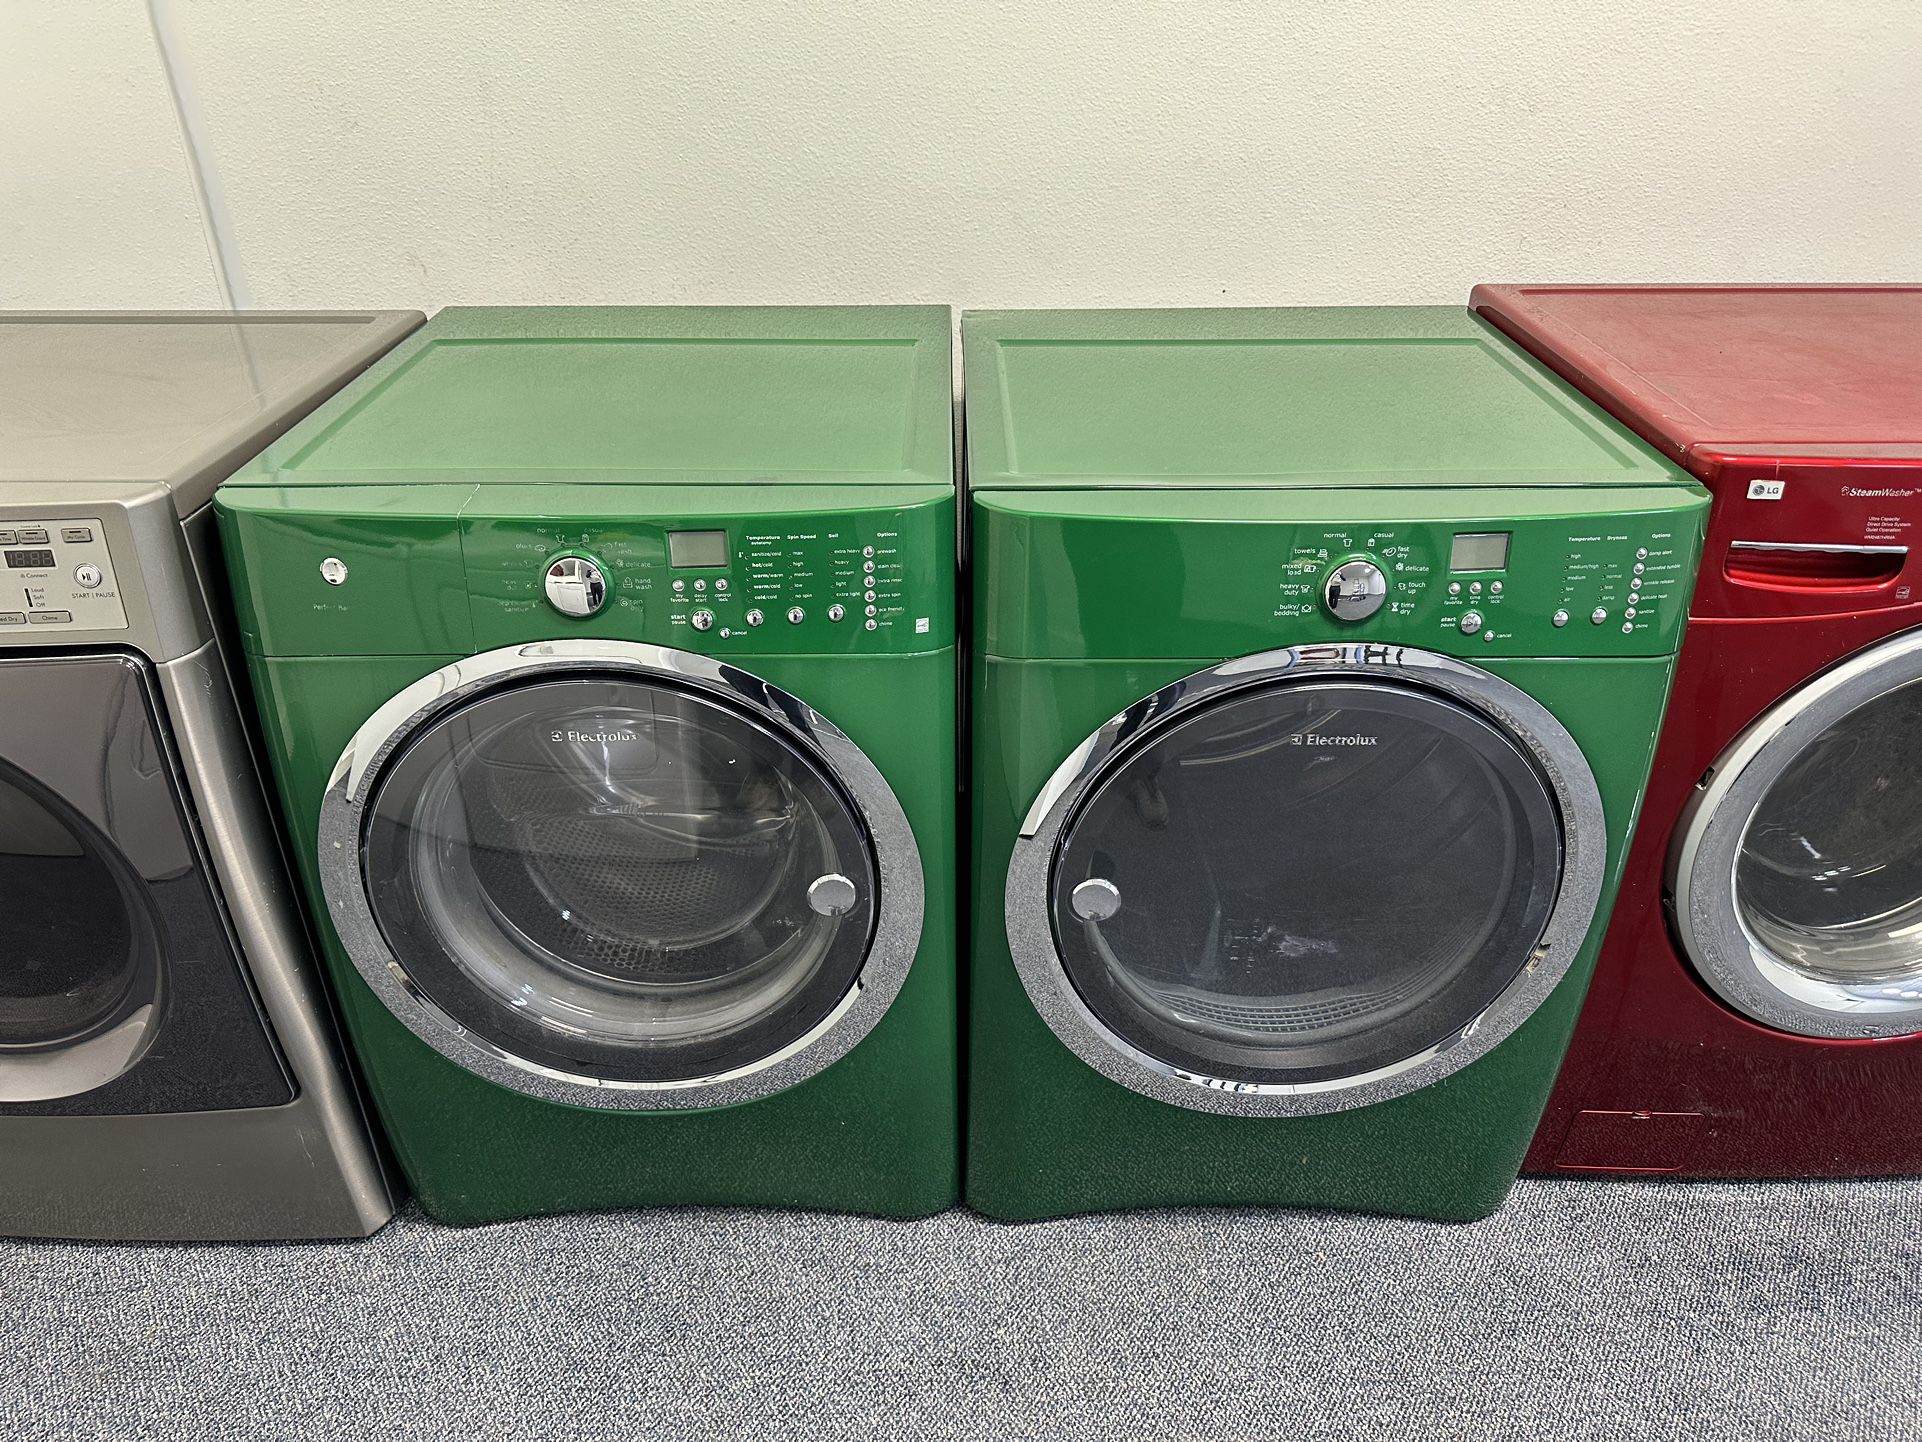 ELECTROLUX WASHER DRYER ELECTRIC STACKABLE 